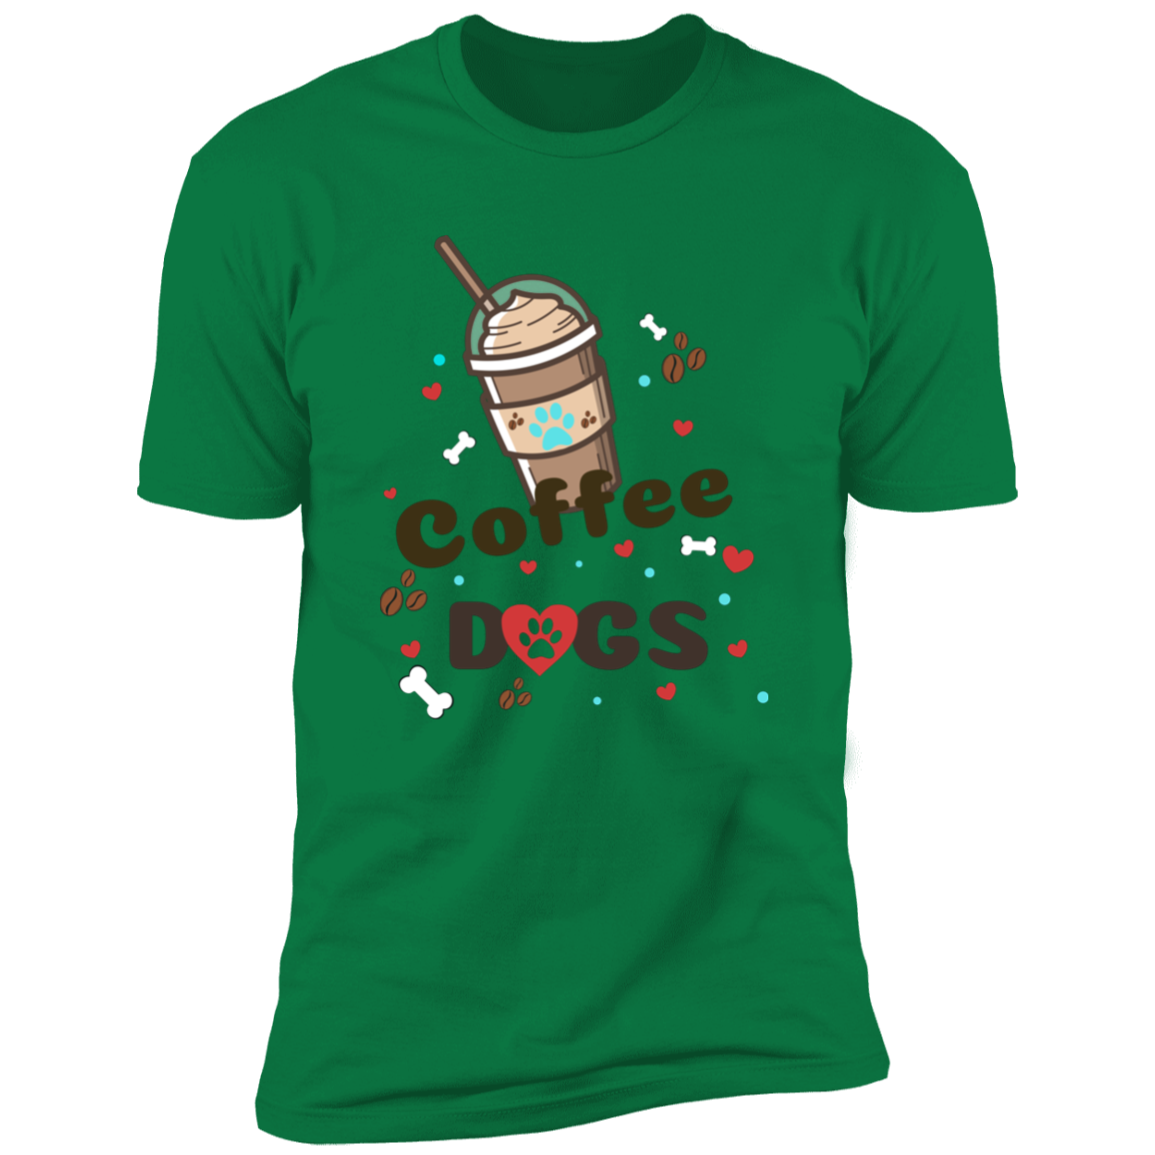 Blended Coffee Dogs T-shirt, Dog Shirt for humans, in kelly green